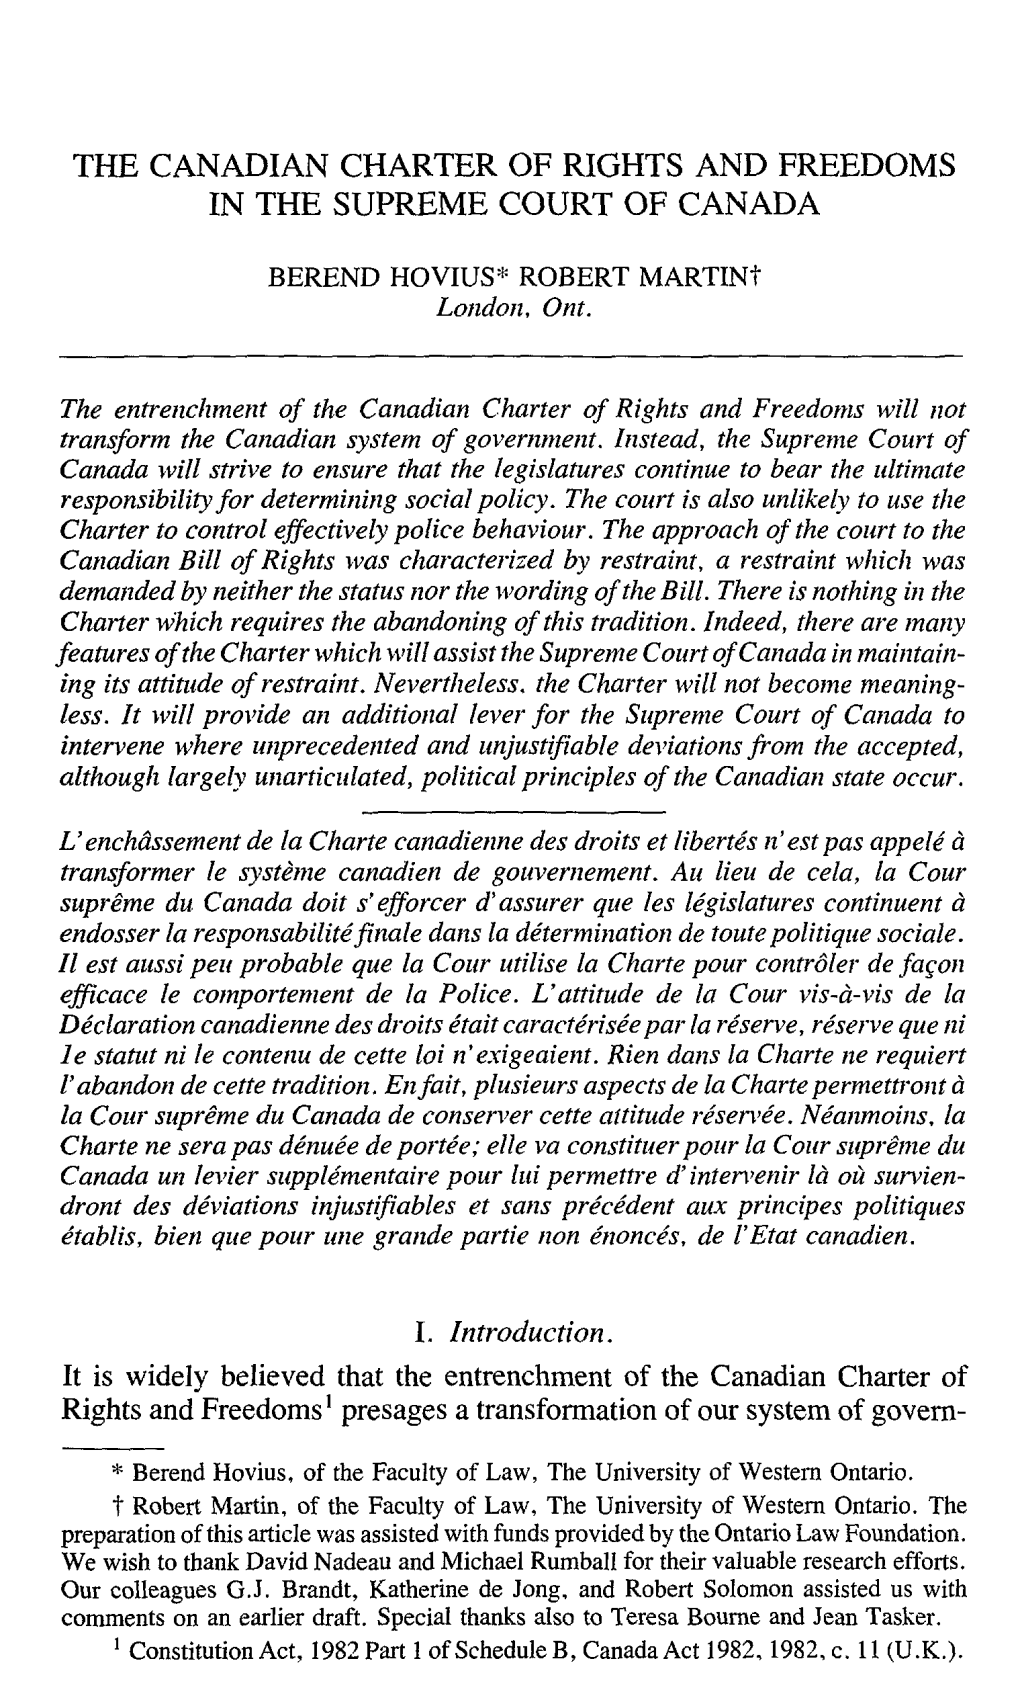 The Canadian Charter of Rights and Freedoms in the Supreme Court of Canada